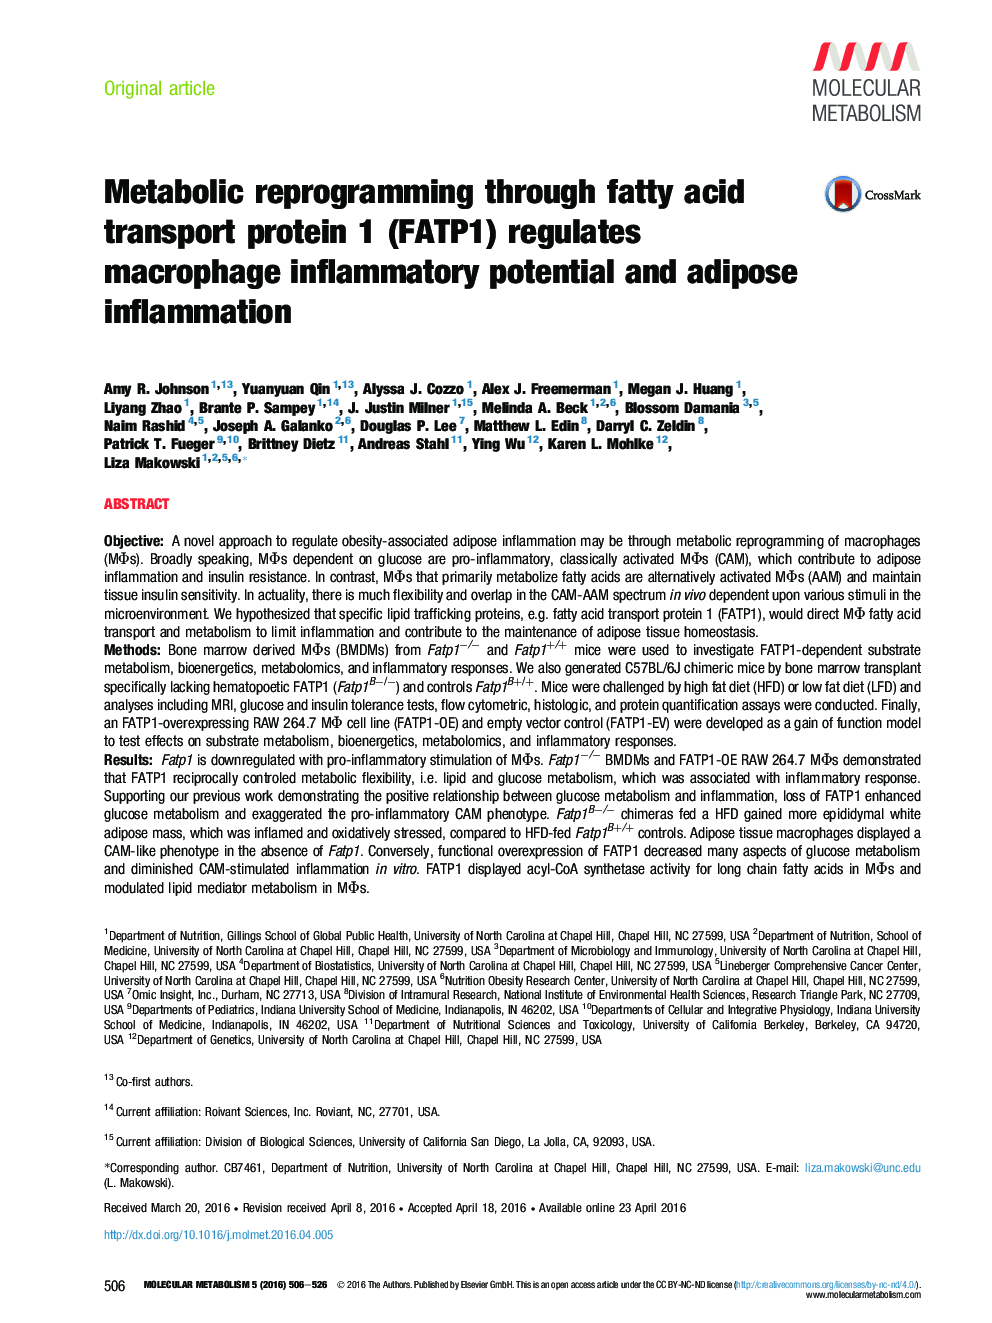 Metabolic reprogramming through fatty acid transport protein 1 (FATP1) regulates macrophage inflammatory potential and adipose inflammation